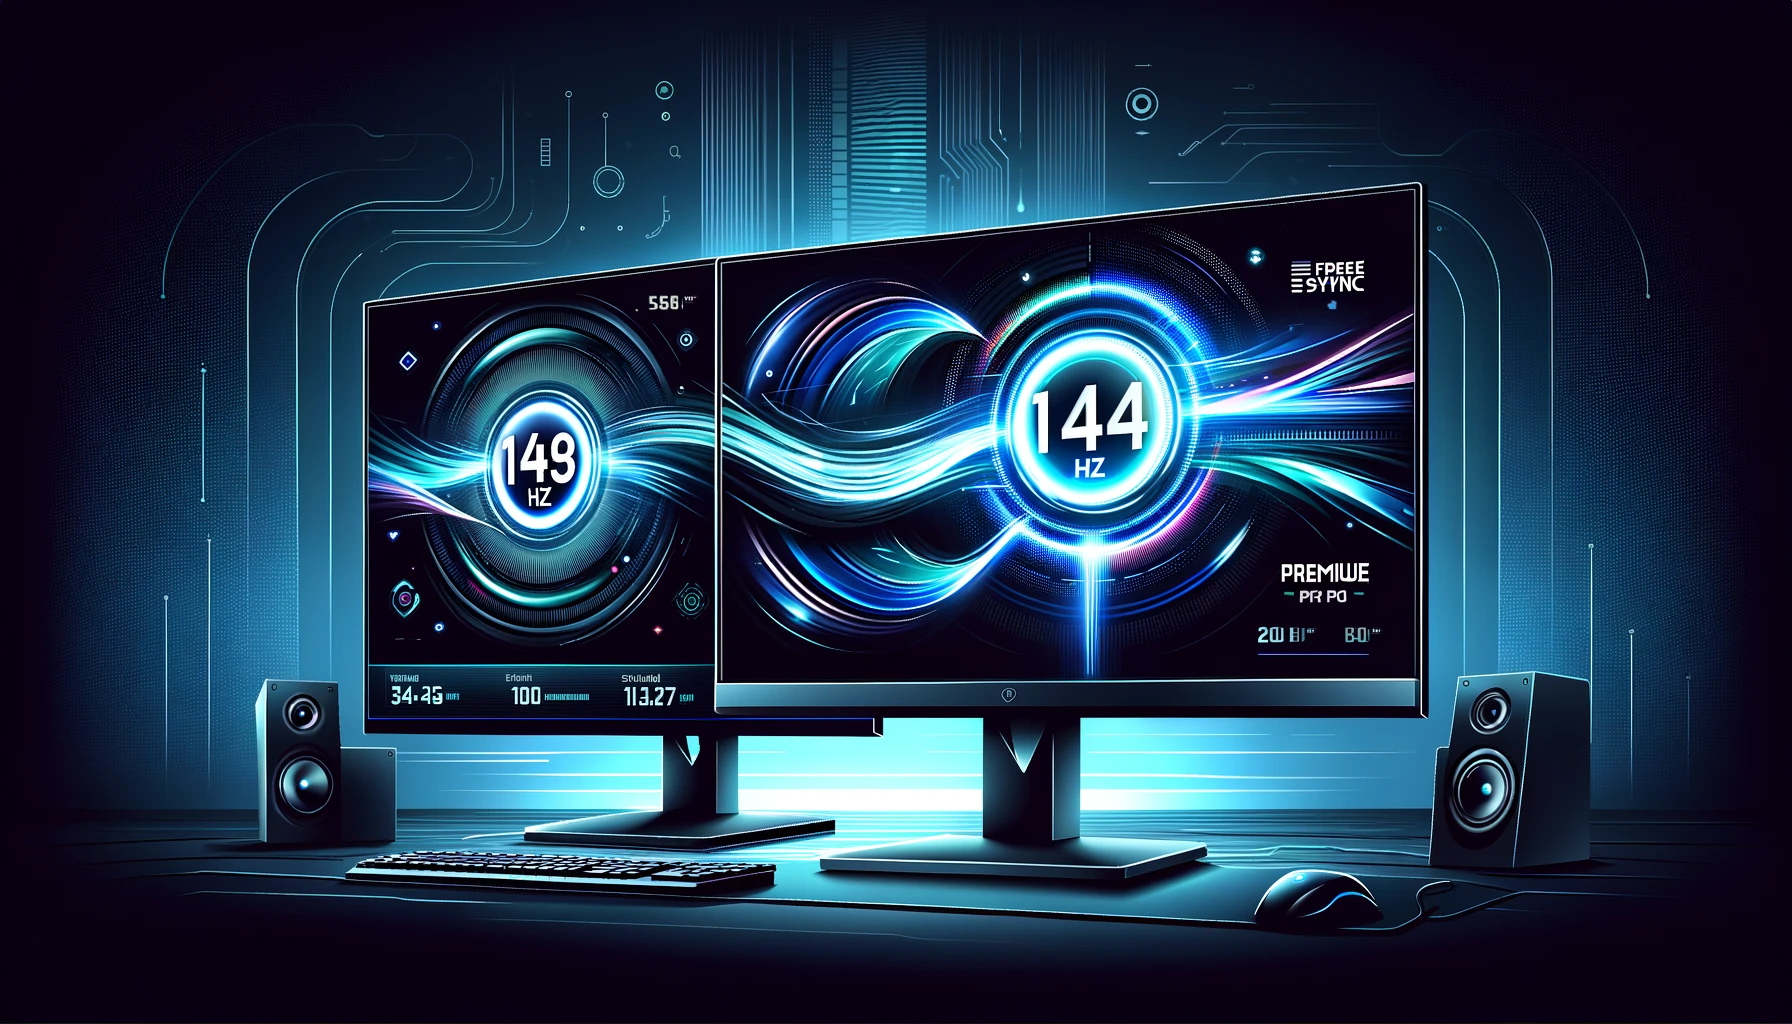 AMD Increases Minimum FHD Monitor Specifications for Freesync Certification to 144 Hz, and to 200 Hz for Premium Pro Category